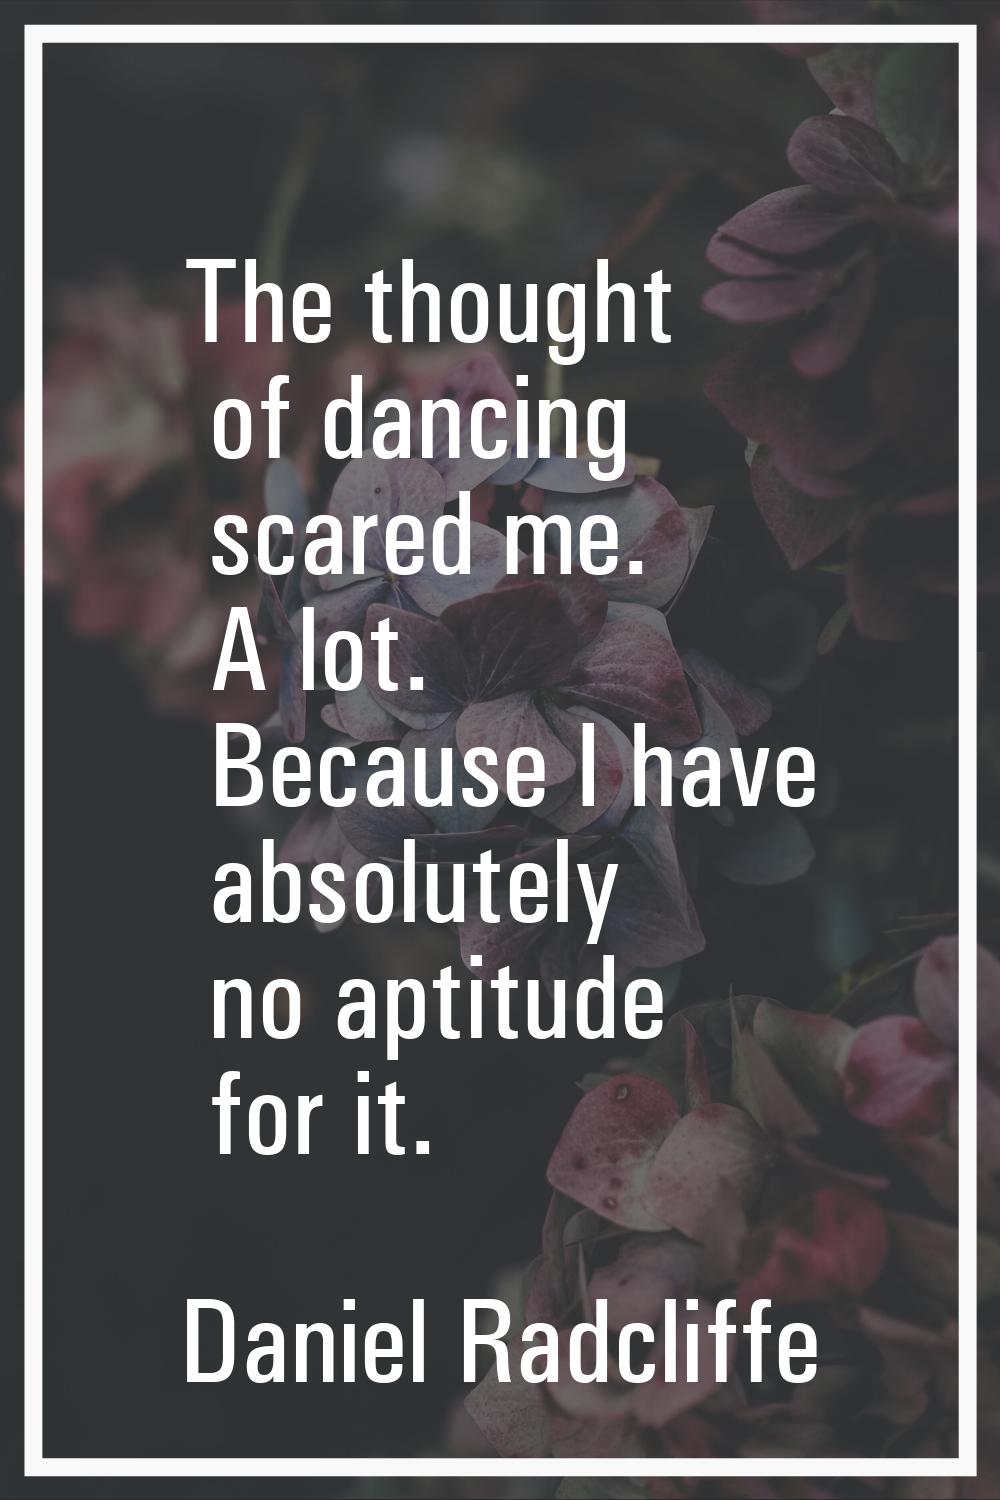 The thought of dancing scared me. A lot. Because I have absolutely no aptitude for it.